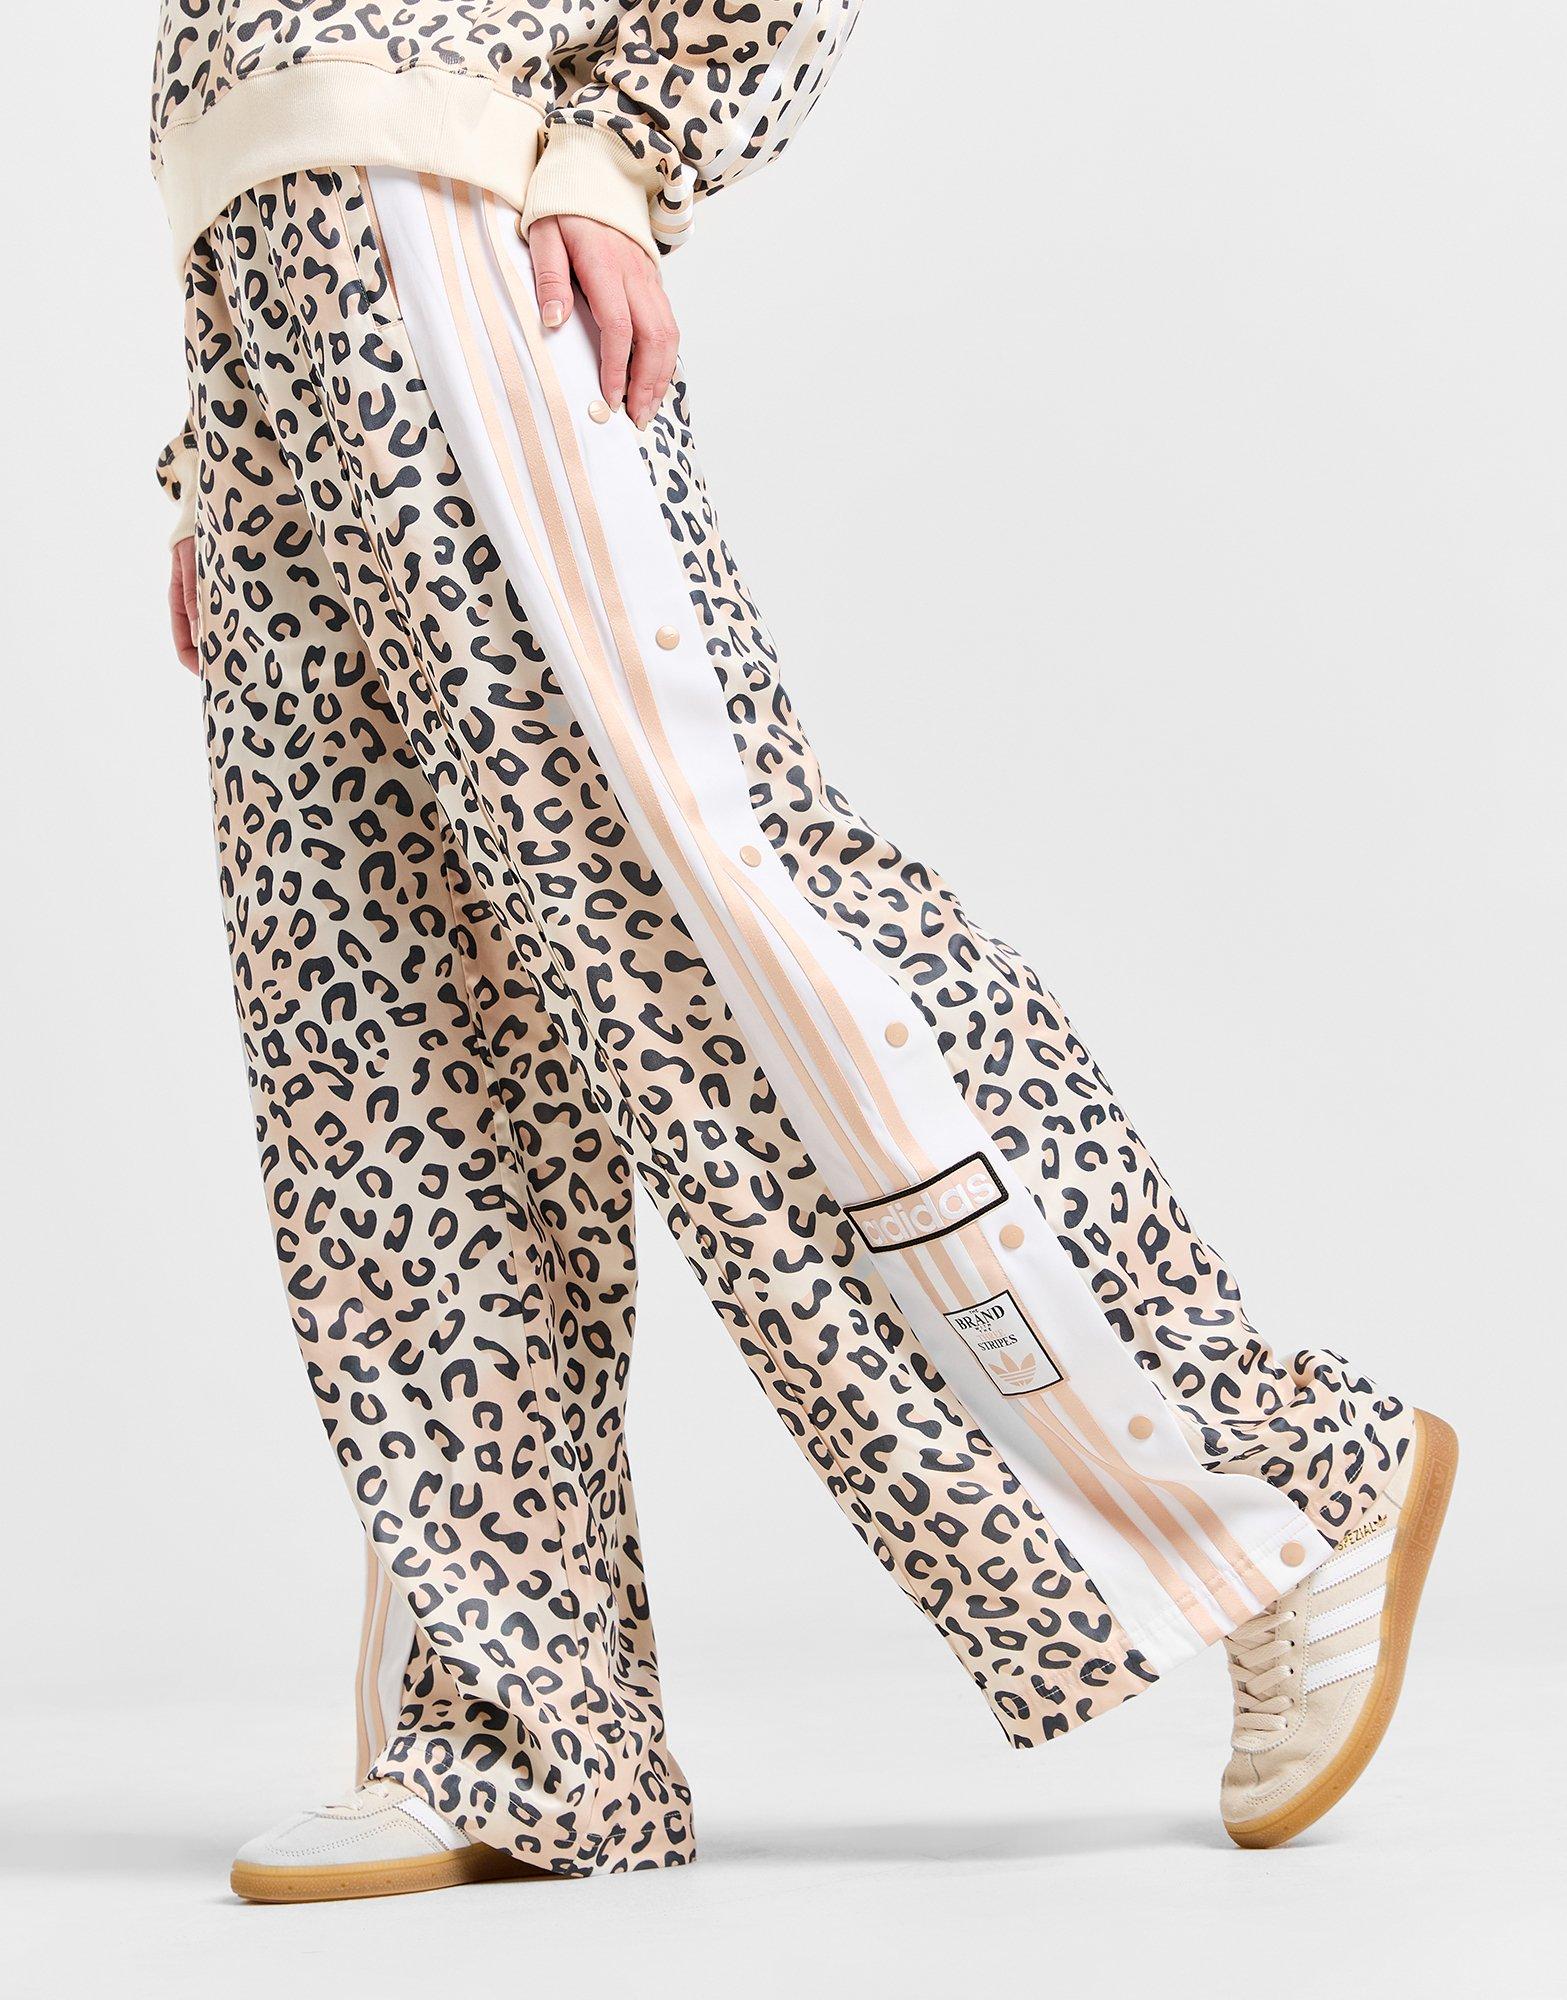 Flared Leopard Pants – Max & Addy